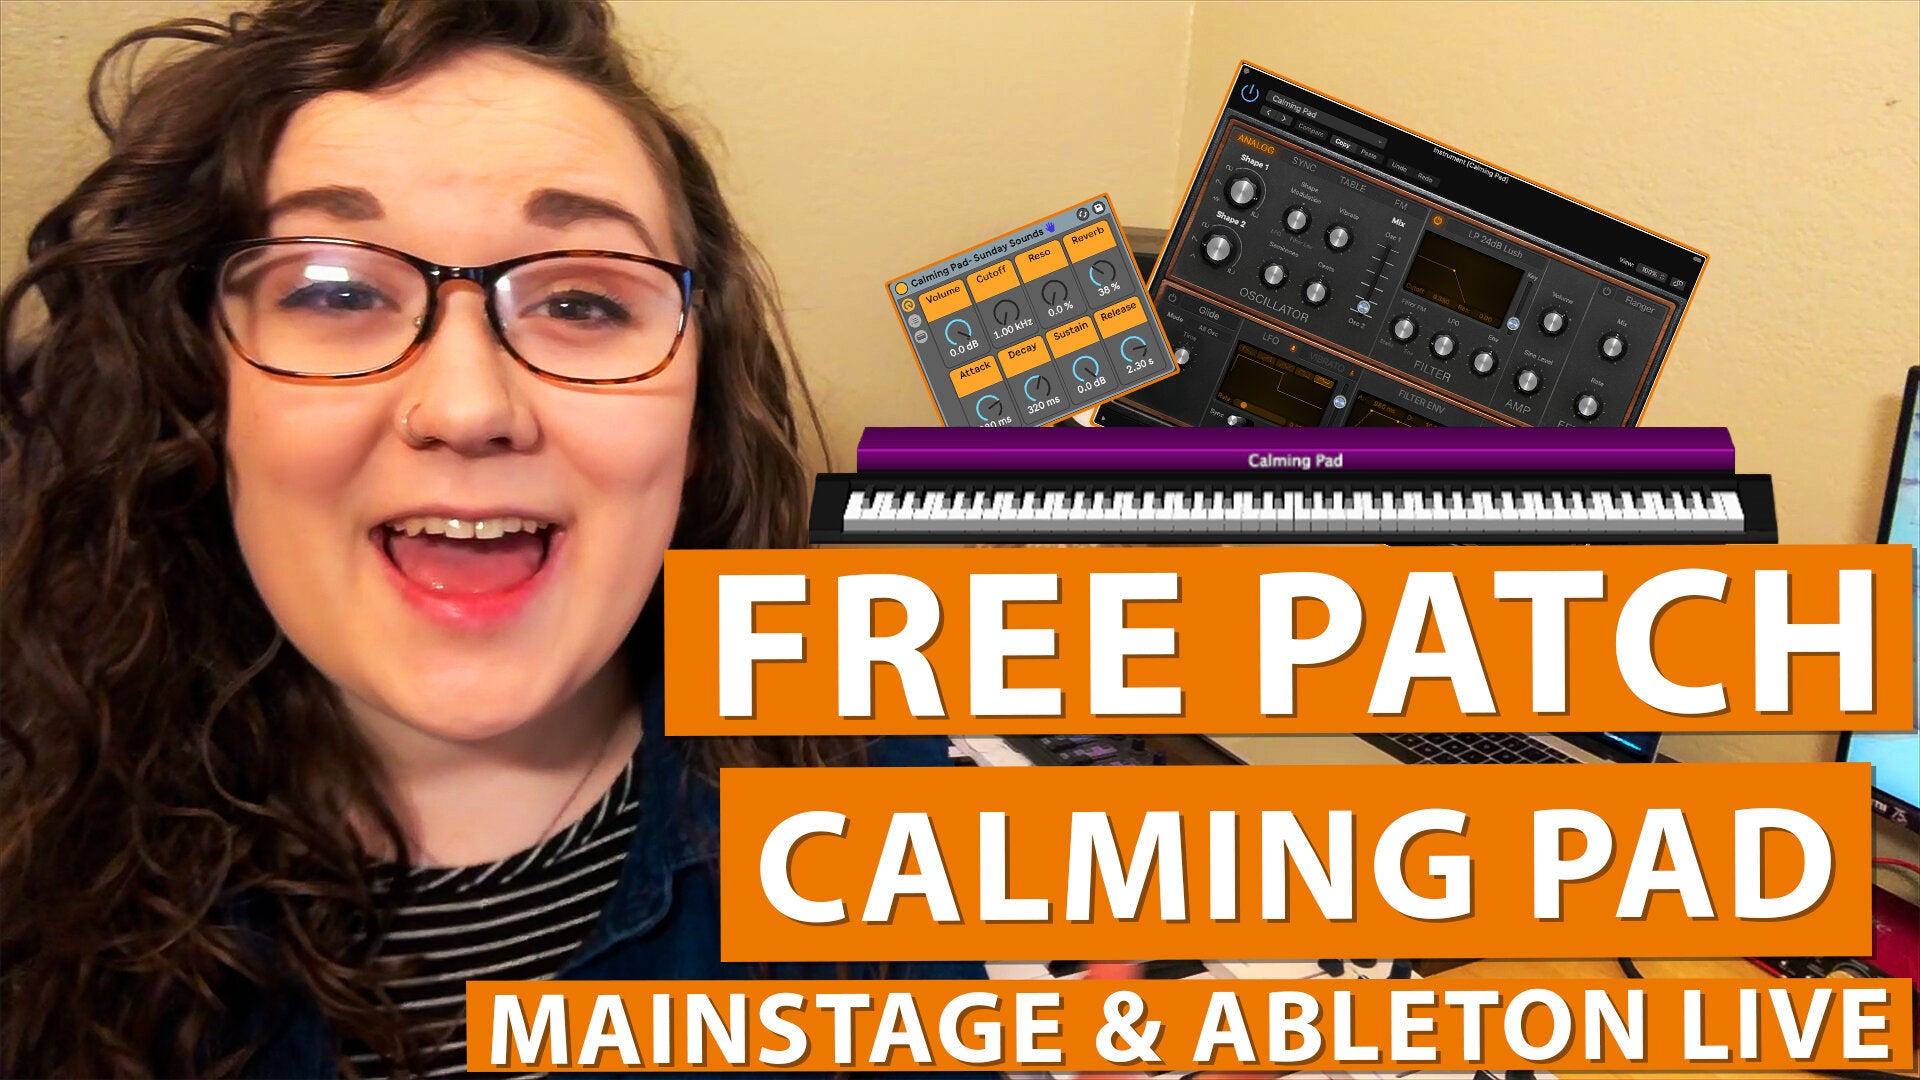 Free MainStage & Ableton Worship Patch! - Calming Pad